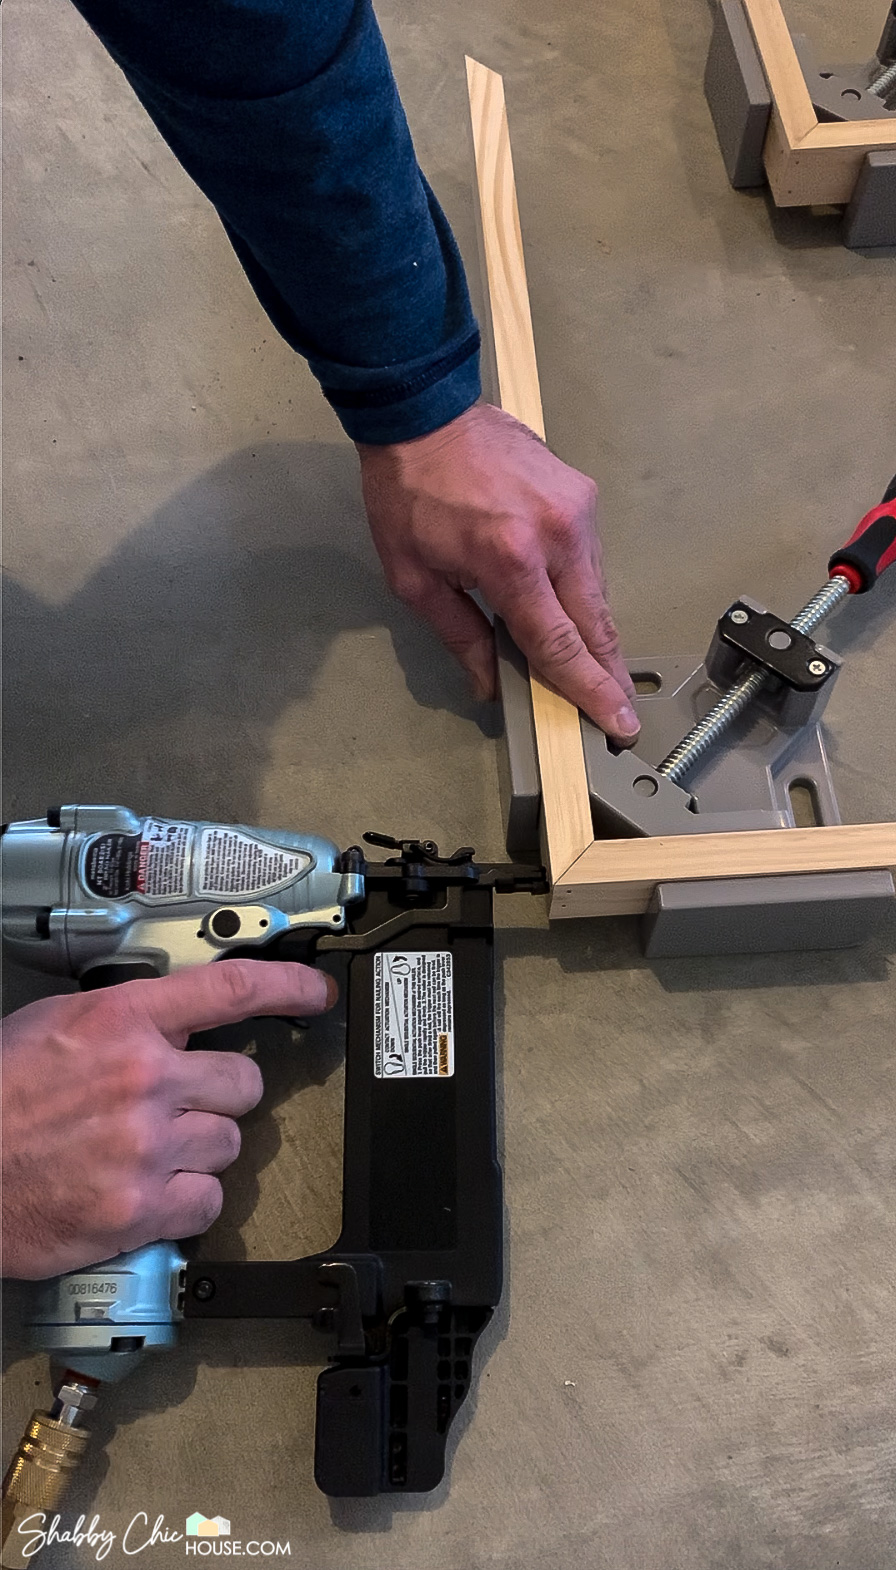 Building a wooden DIY Floating Picture Frame and brad nailing the corners while they are held in place by a 90-degree clamp.